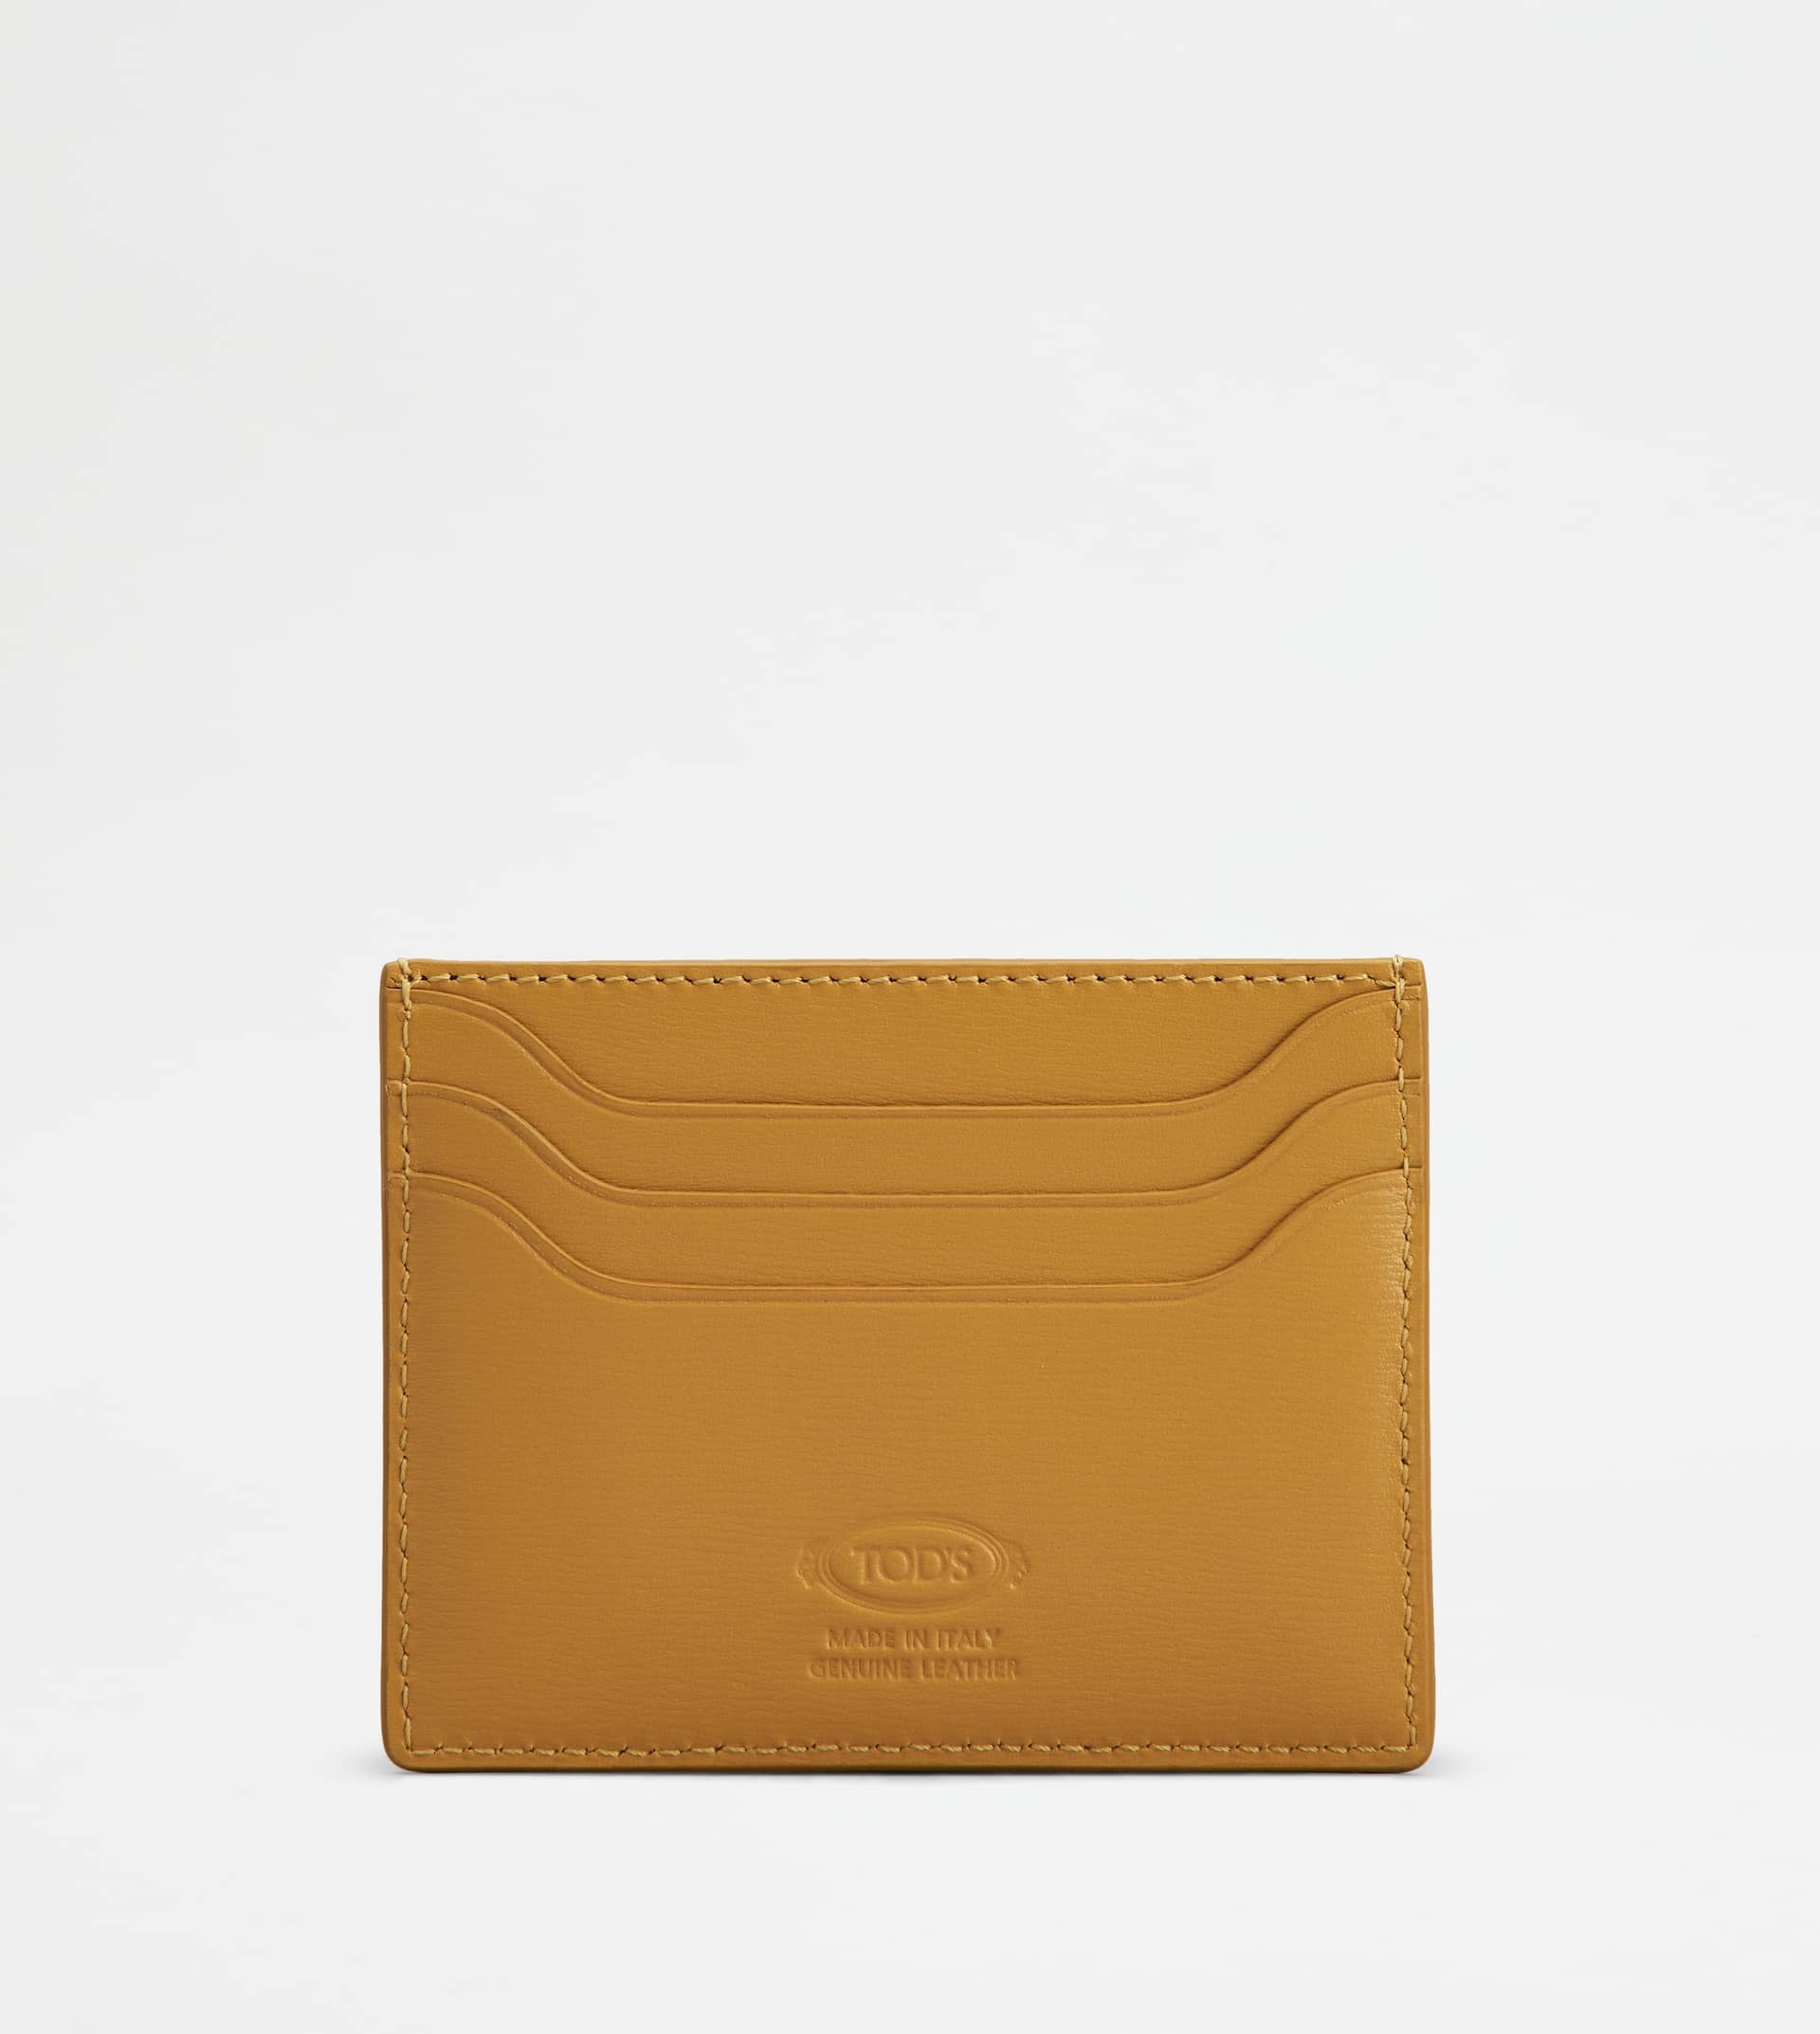 TOD'S CARD HOLDER IN LEATHER - YELLOW - 2